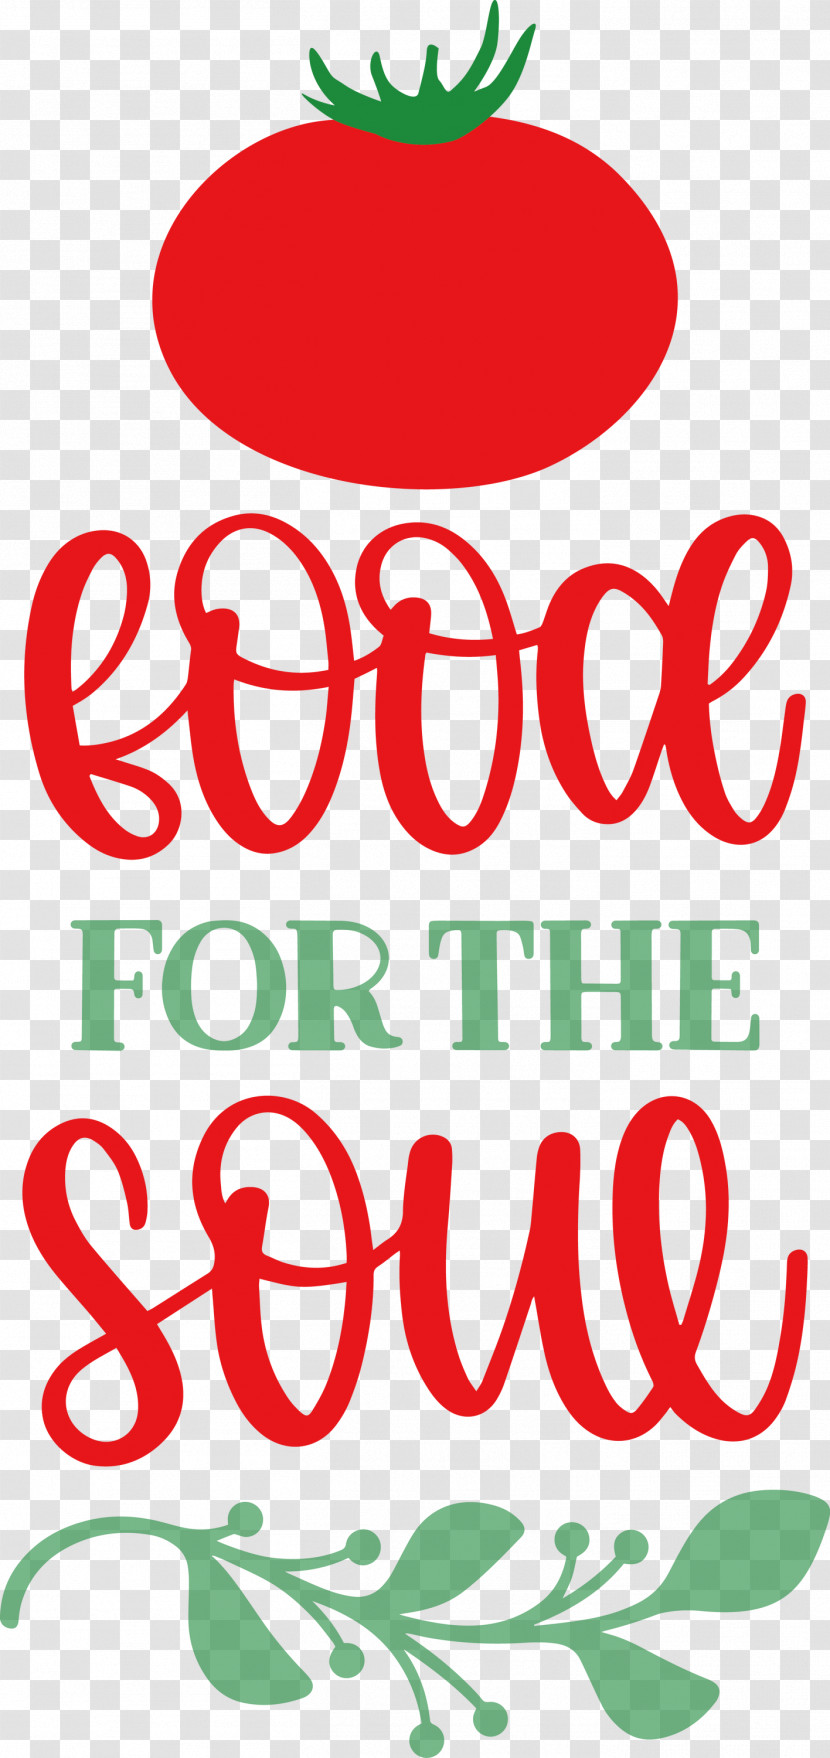 Food For The Soul Food Cooking Transparent PNG